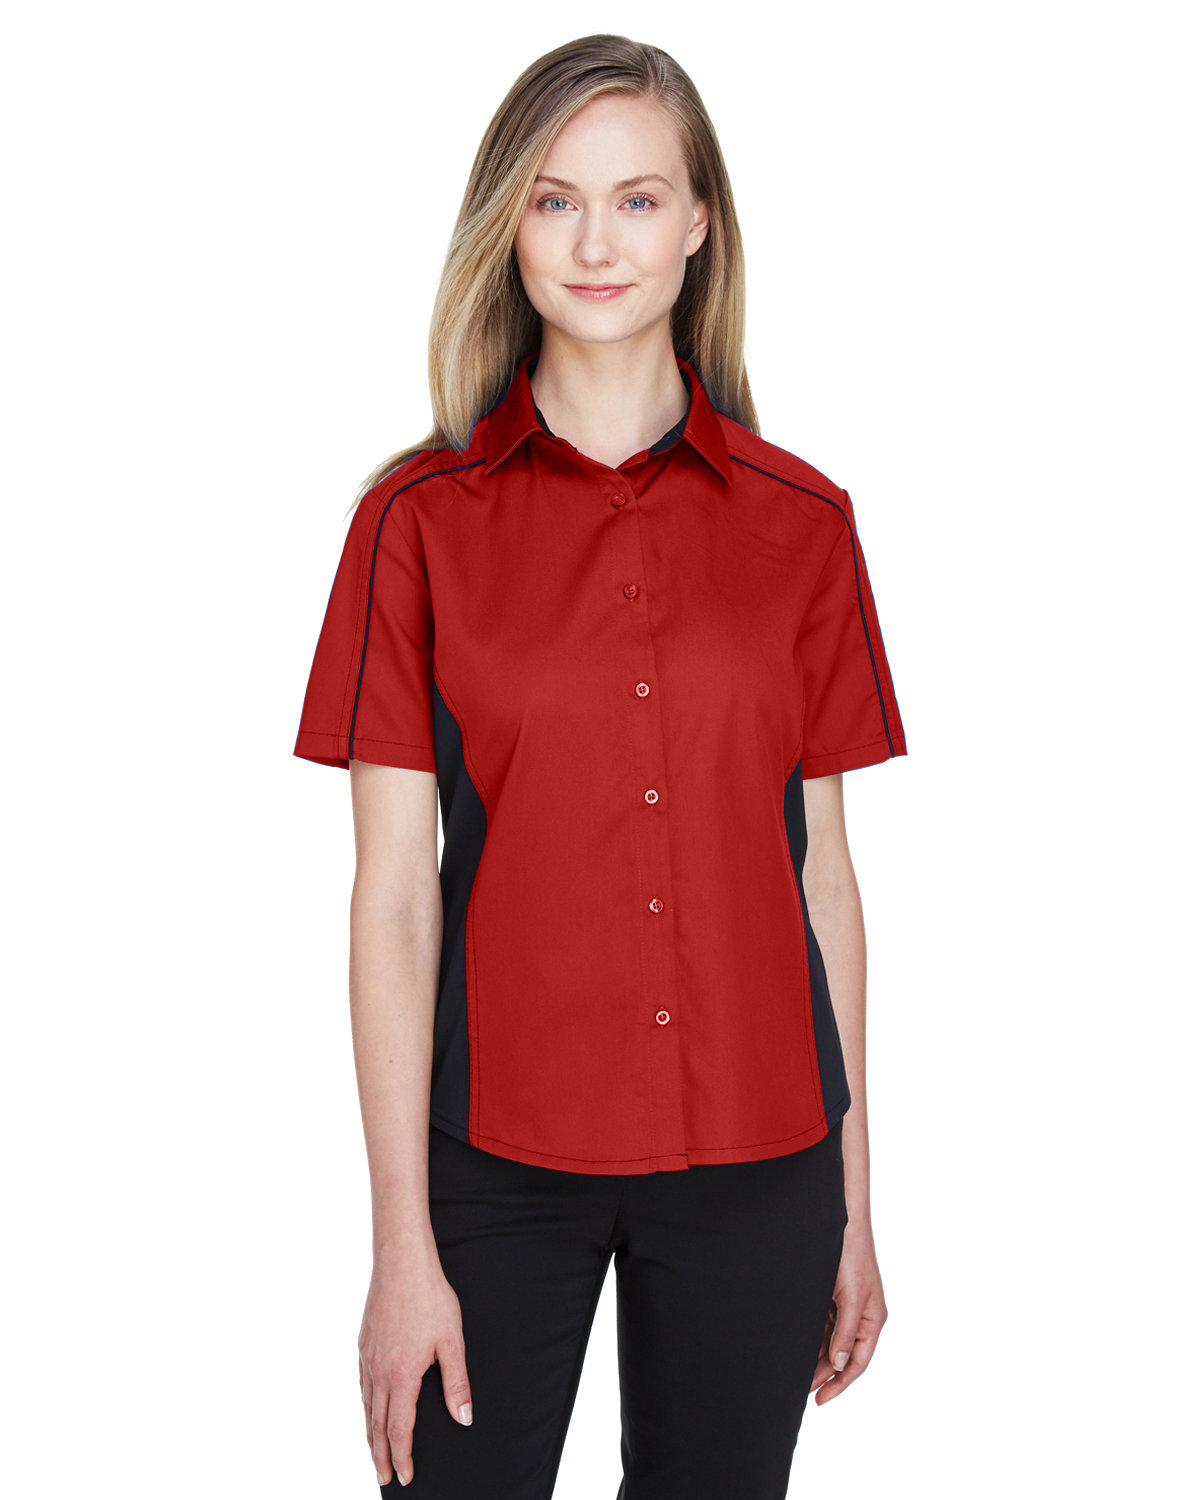 North End Ladies' Fuse Colorblock Twill Shirt CLASSIC RED/ BLK 